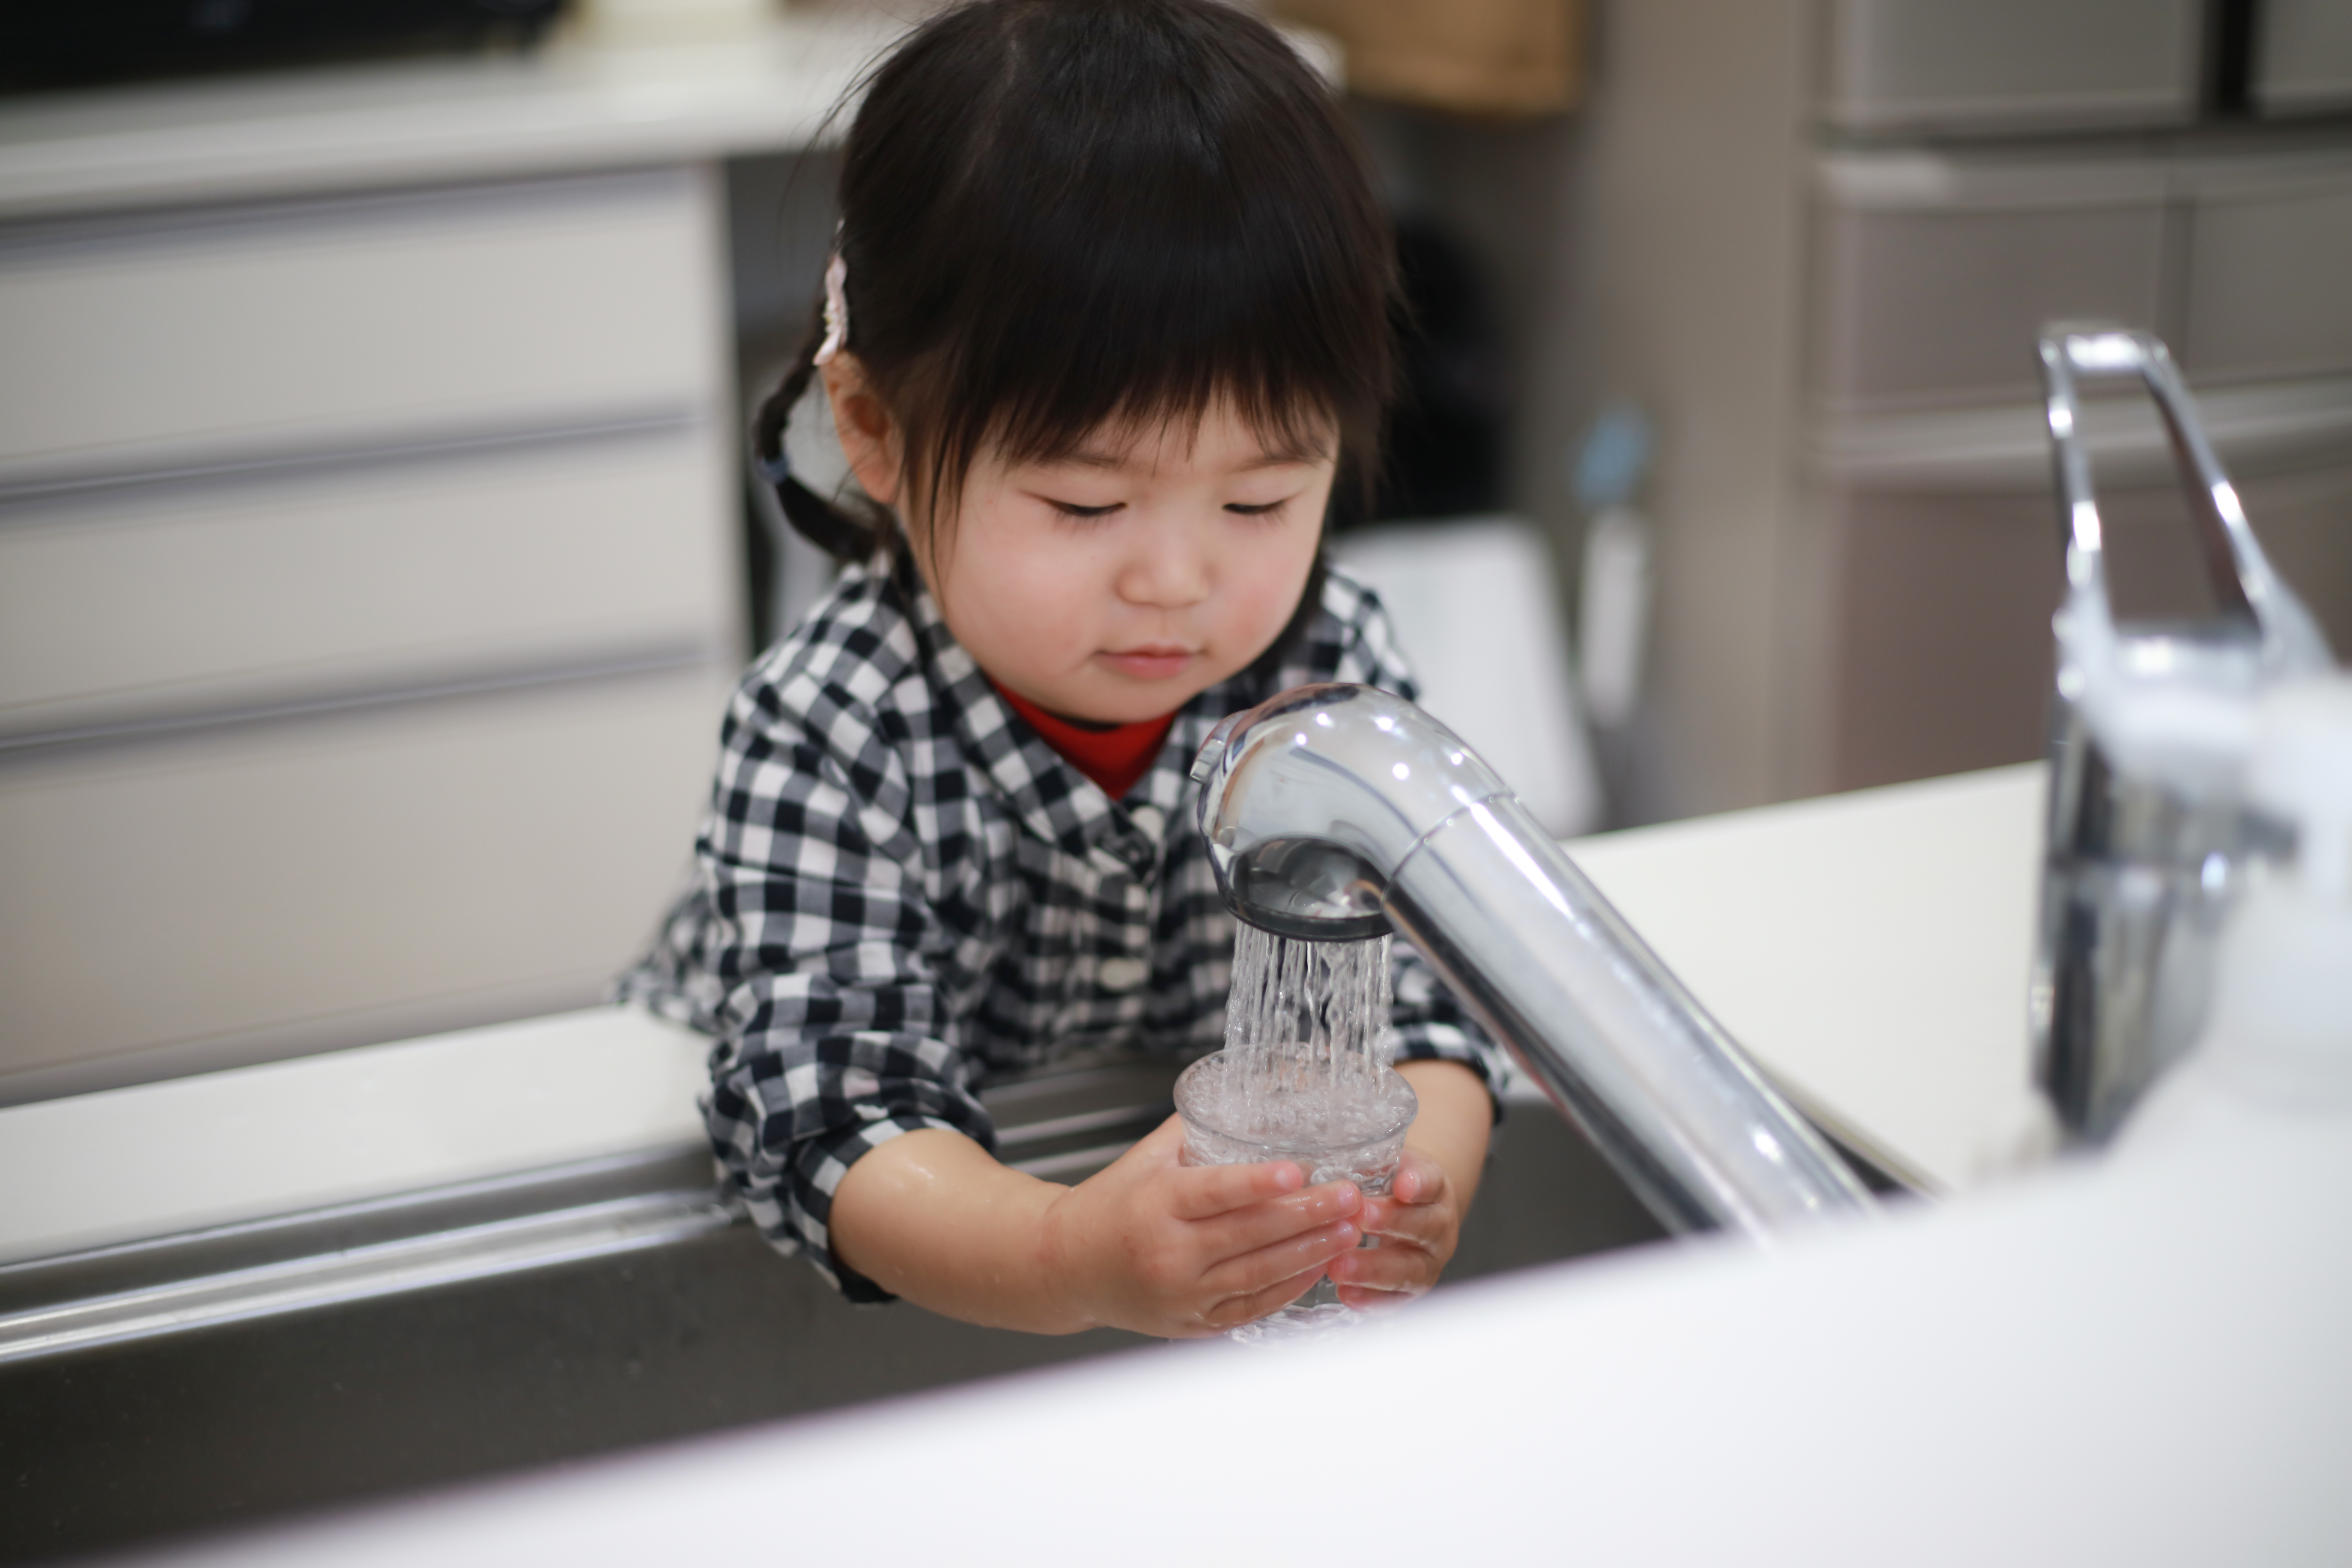 Little girl getting a glass of water from the faucet